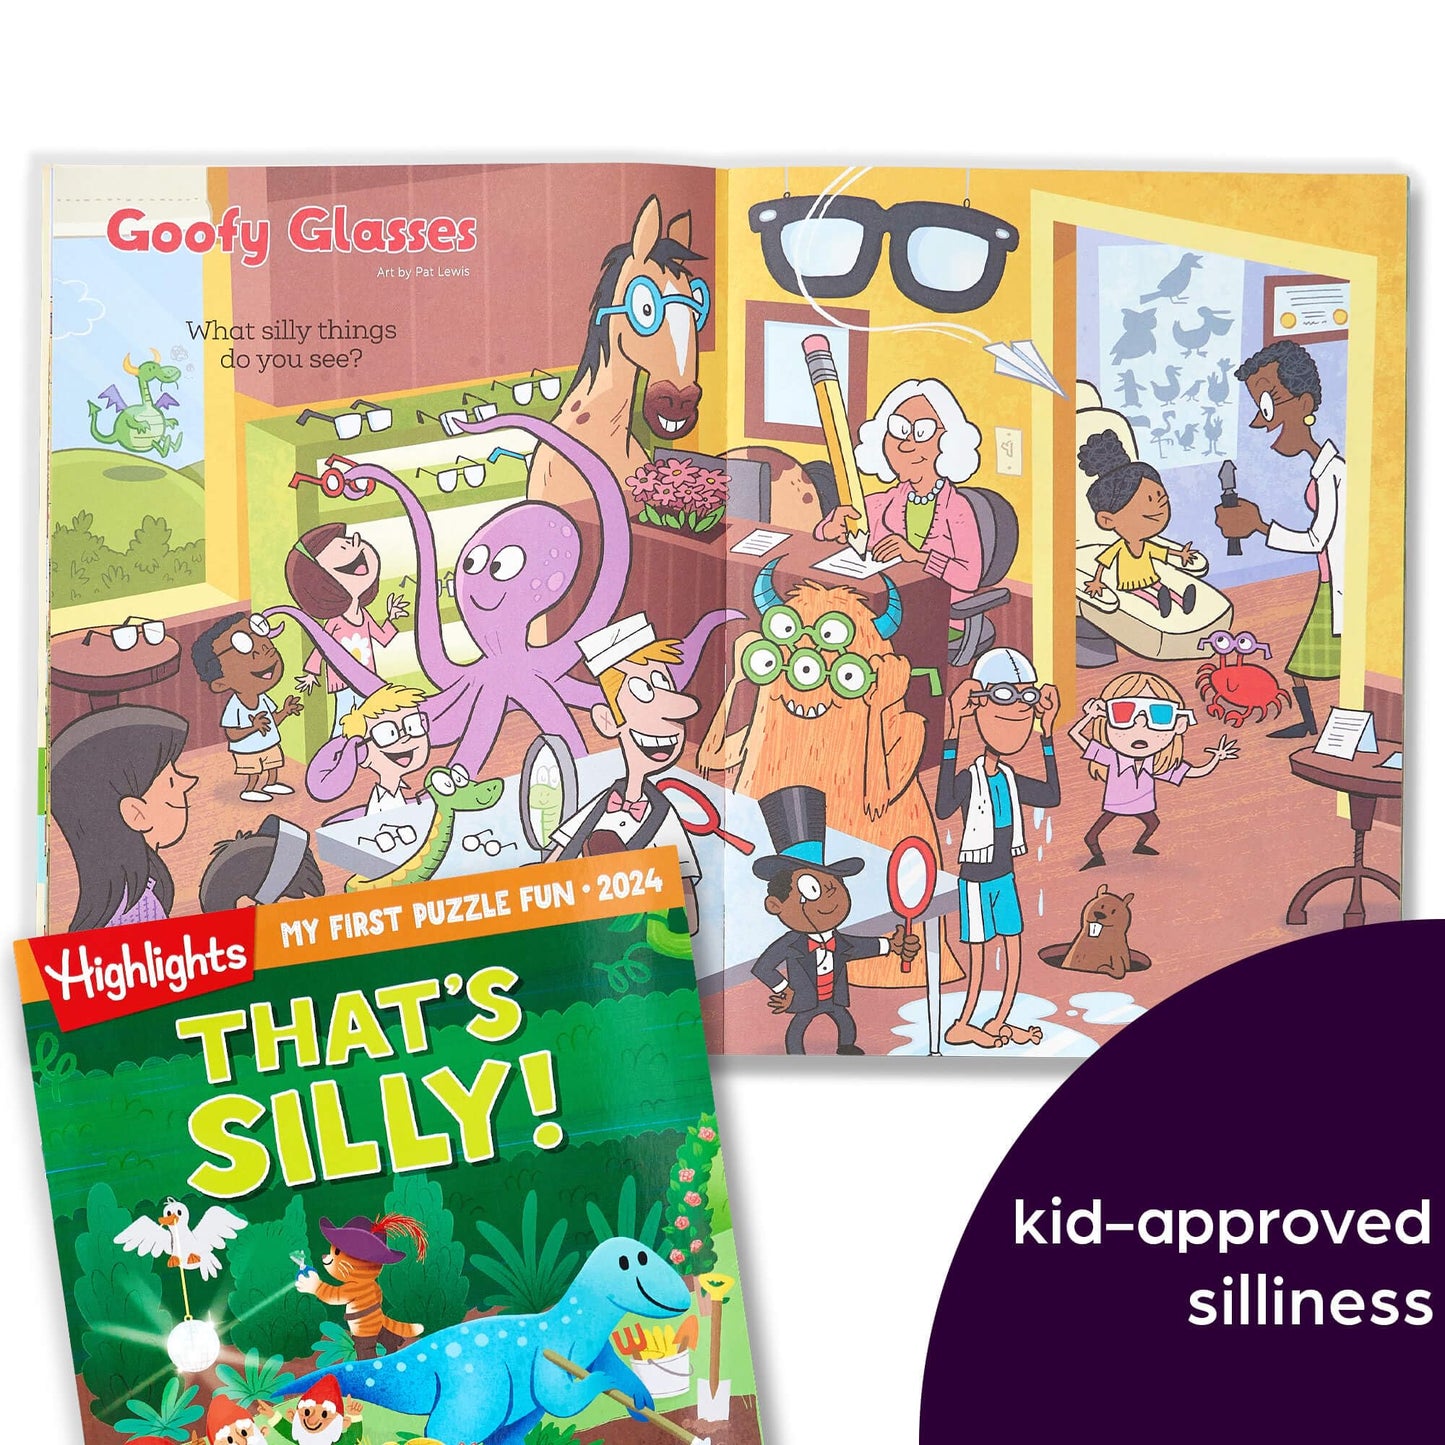 Highlights My First Puzzle Fun 2024 Puzzle Books for Kids Ages 3-6, 4-Book Set of Matching, Mazes, Spot-The-Differences, and More Travel-Friendly Screen Free Brain-Boosting Activities